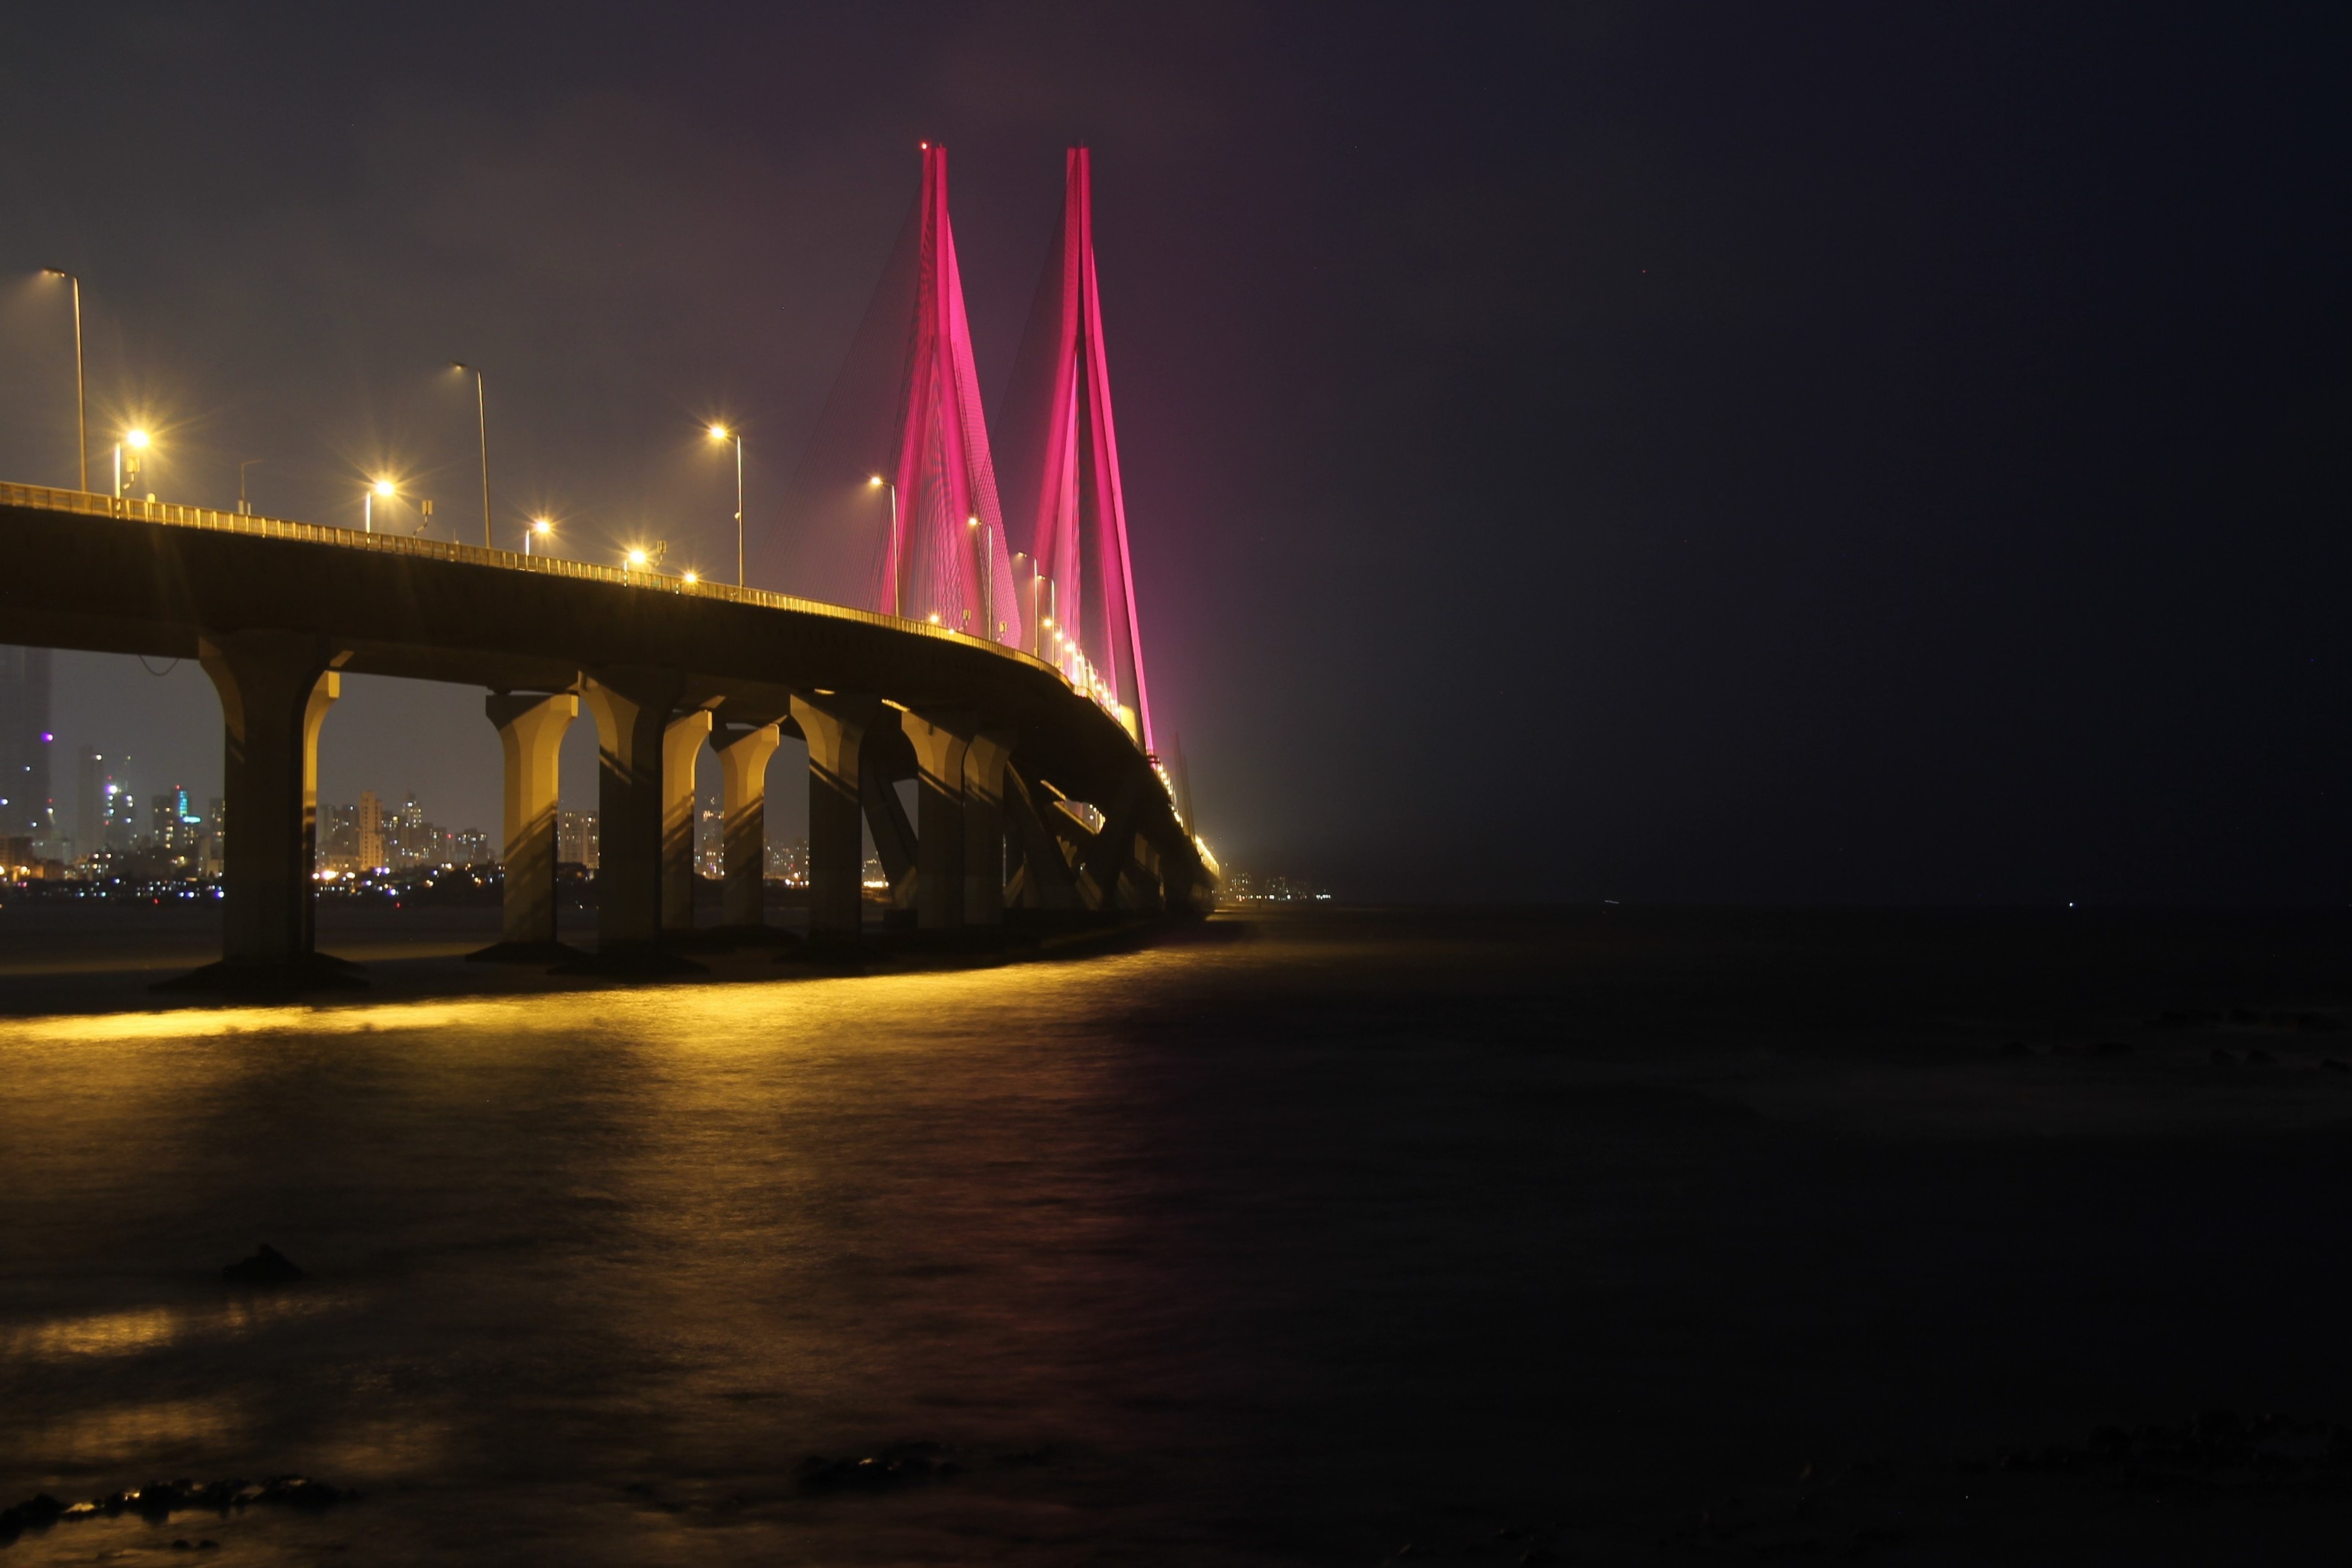 Bandraworli Sea Link One of the Top Attractions in Mumbai, India